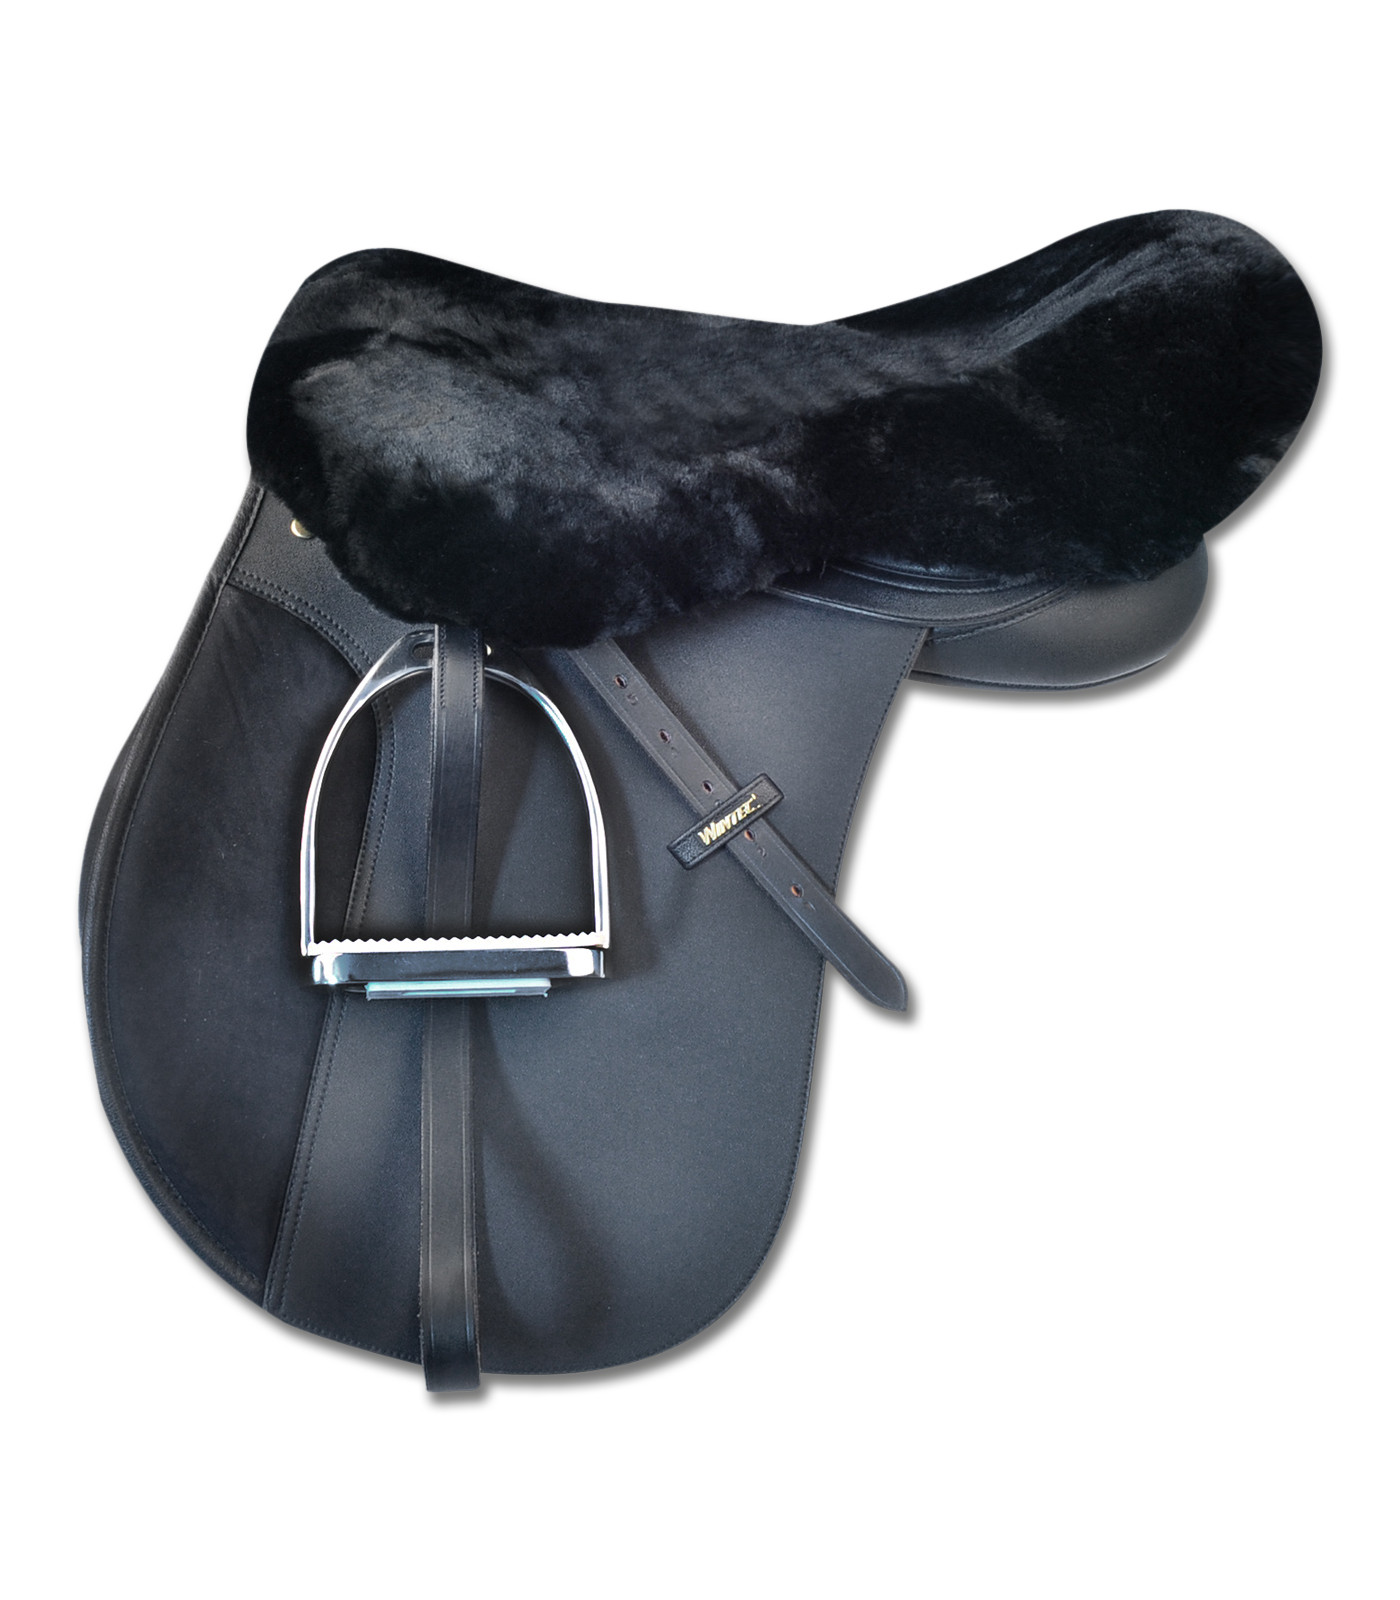 Real Lambskin Seat Cover for saddle black